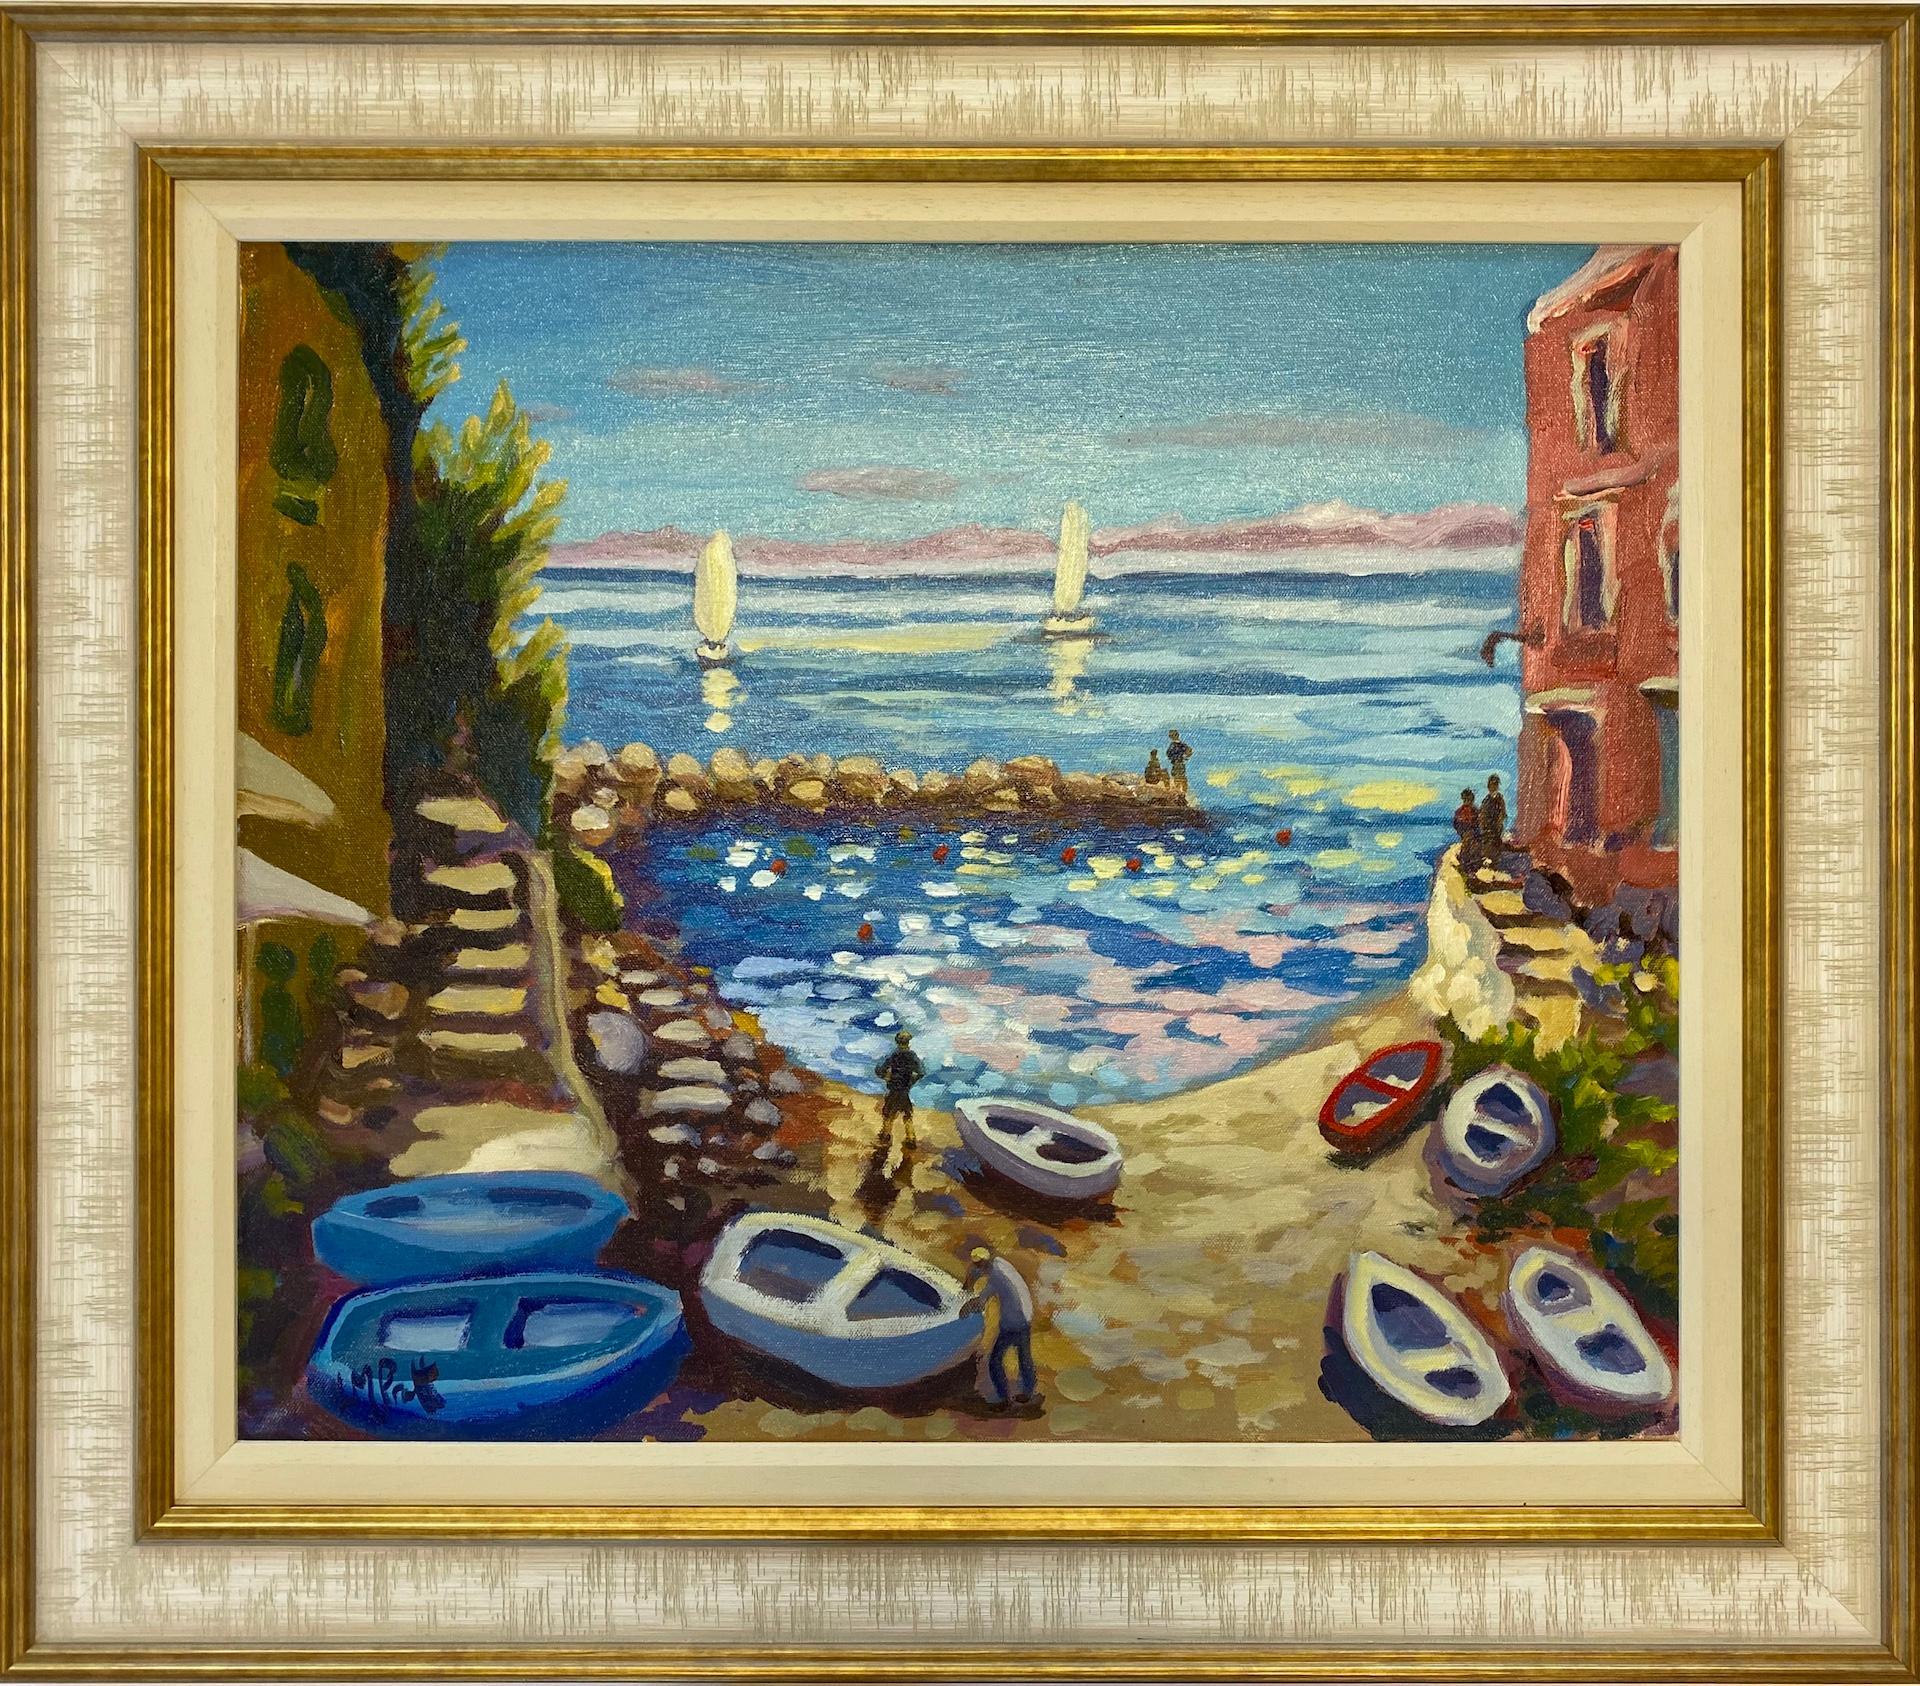 Lucy Pratt
Down with the Boats
Original Seascape Painting
Oil on Canvas
Canvas Size: H 50cm x W 60cm
Framed Size: H 68.5cm W 78cm x W 3cm
Sold Framed
(Please note that in situ images are purely an indication of how a piece may look).

Down with the